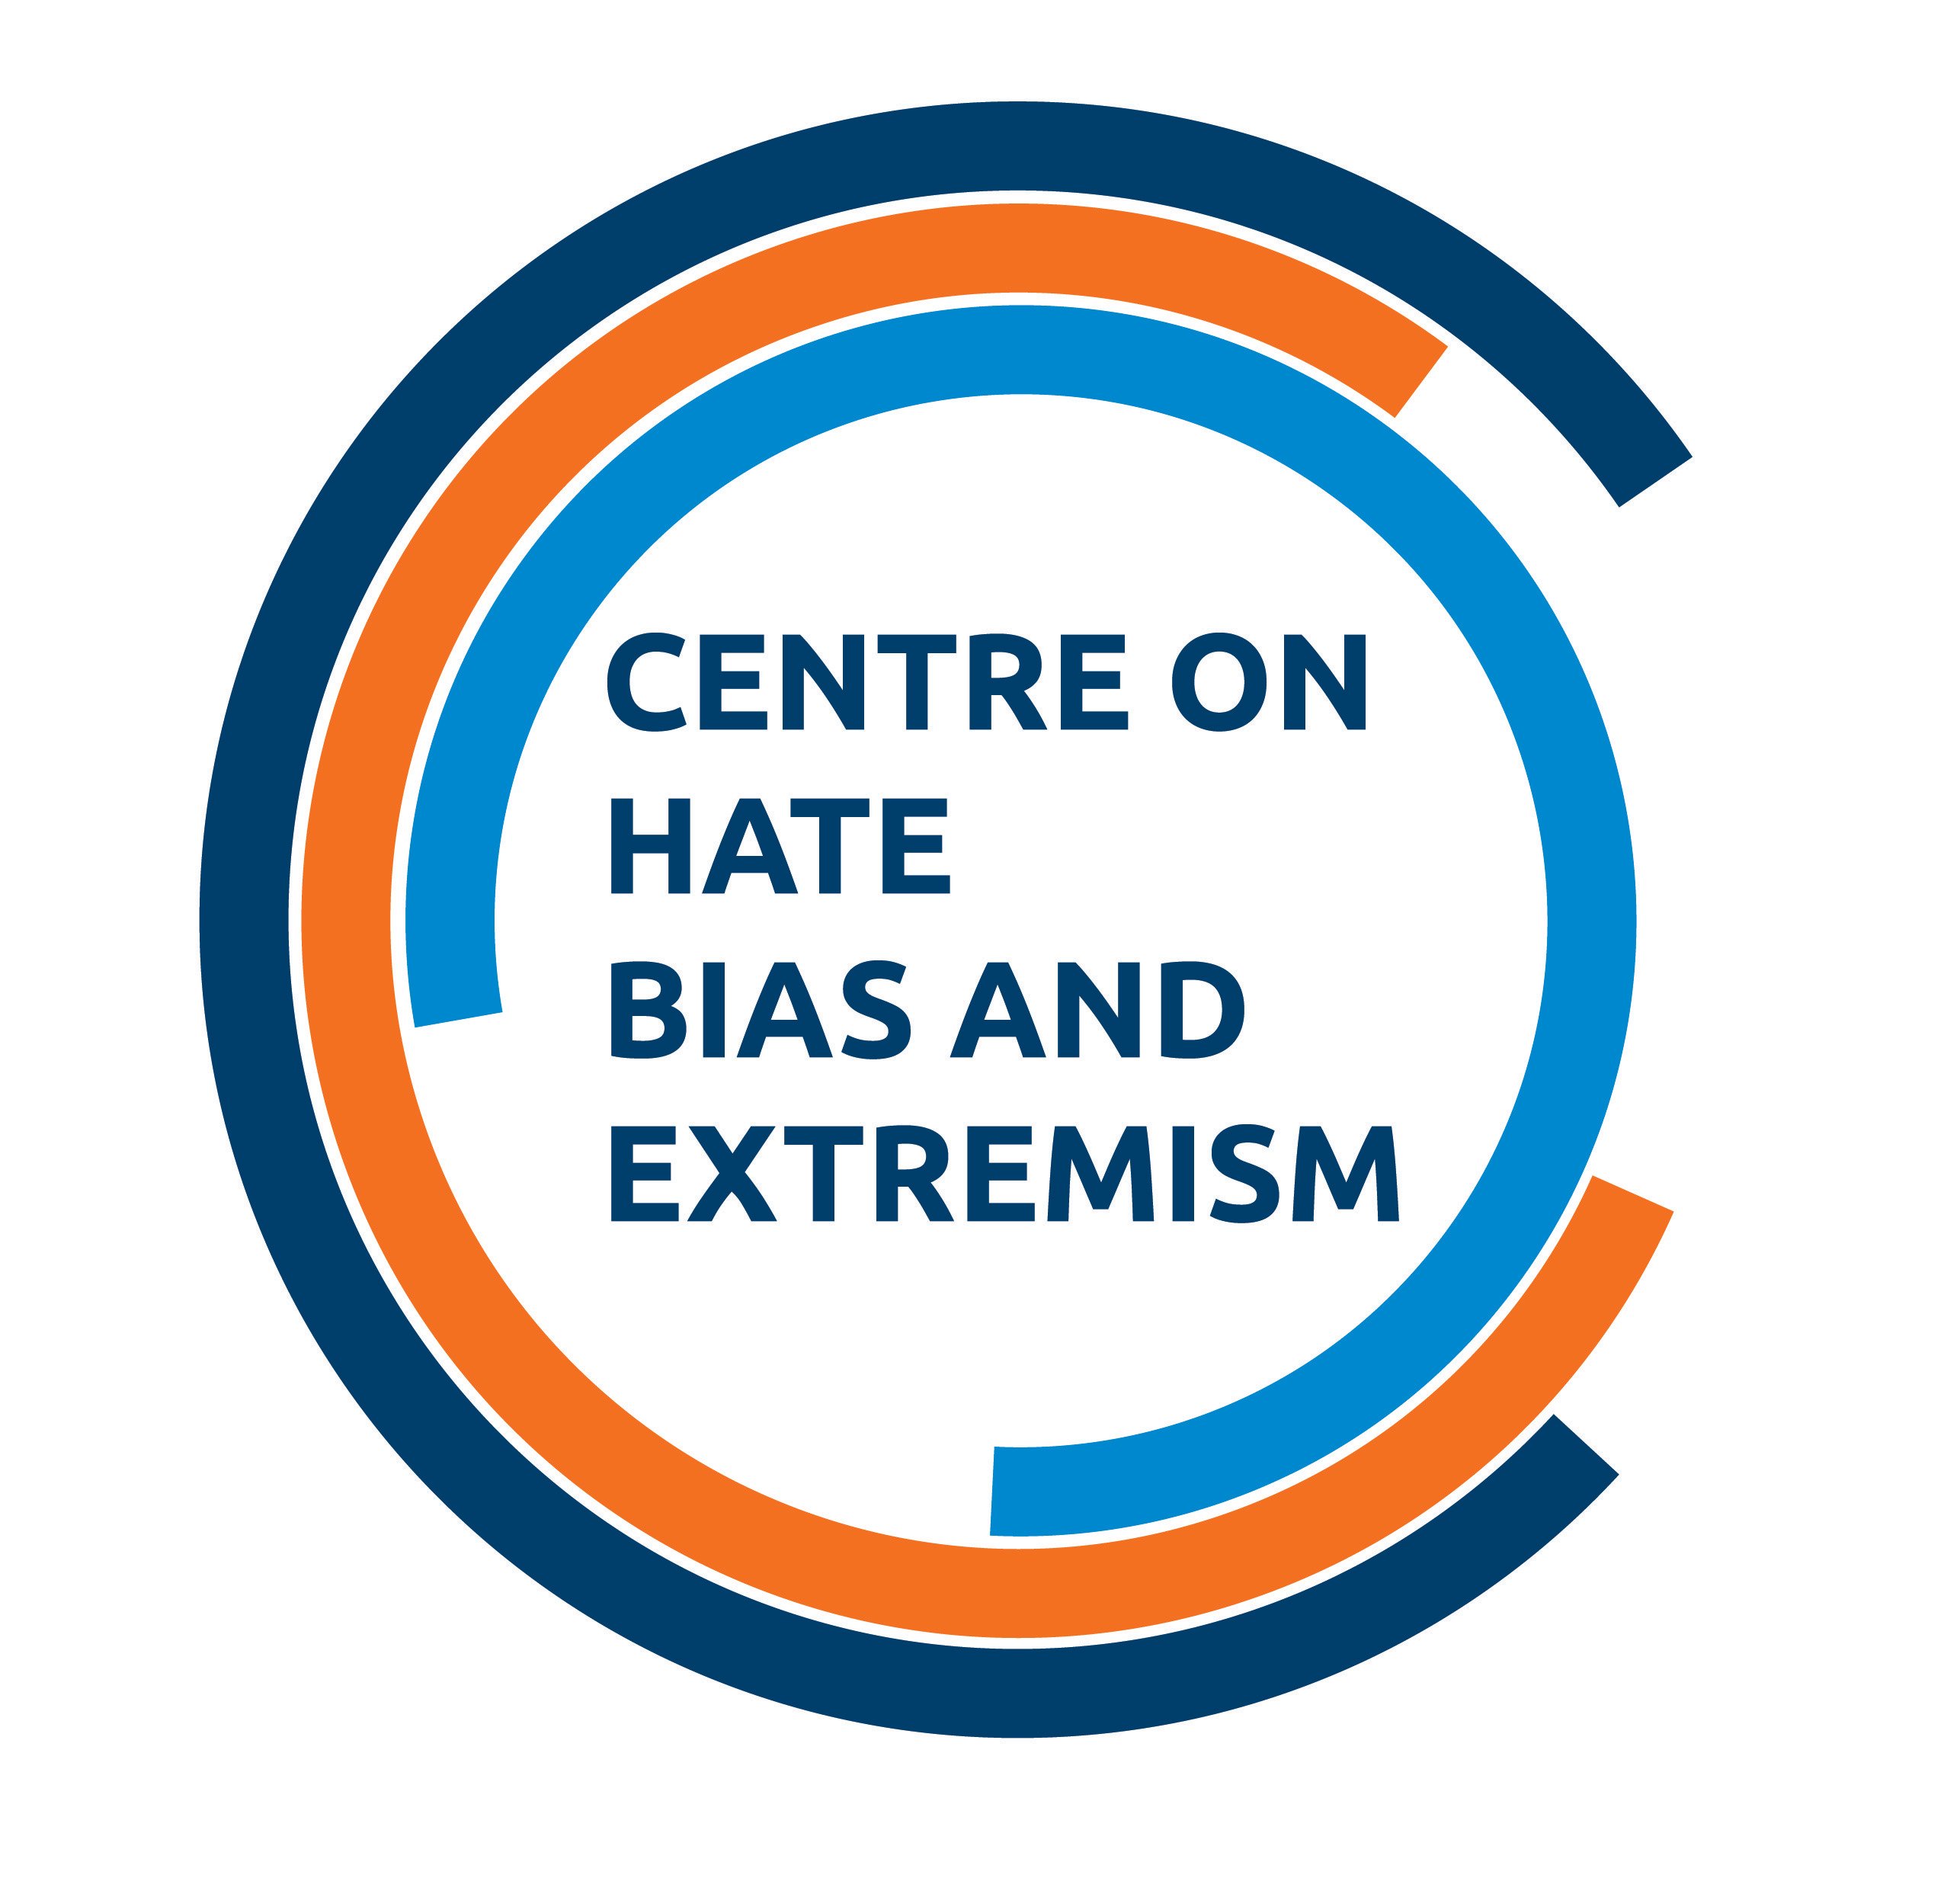 Centre on Hate, Bias and Extremism